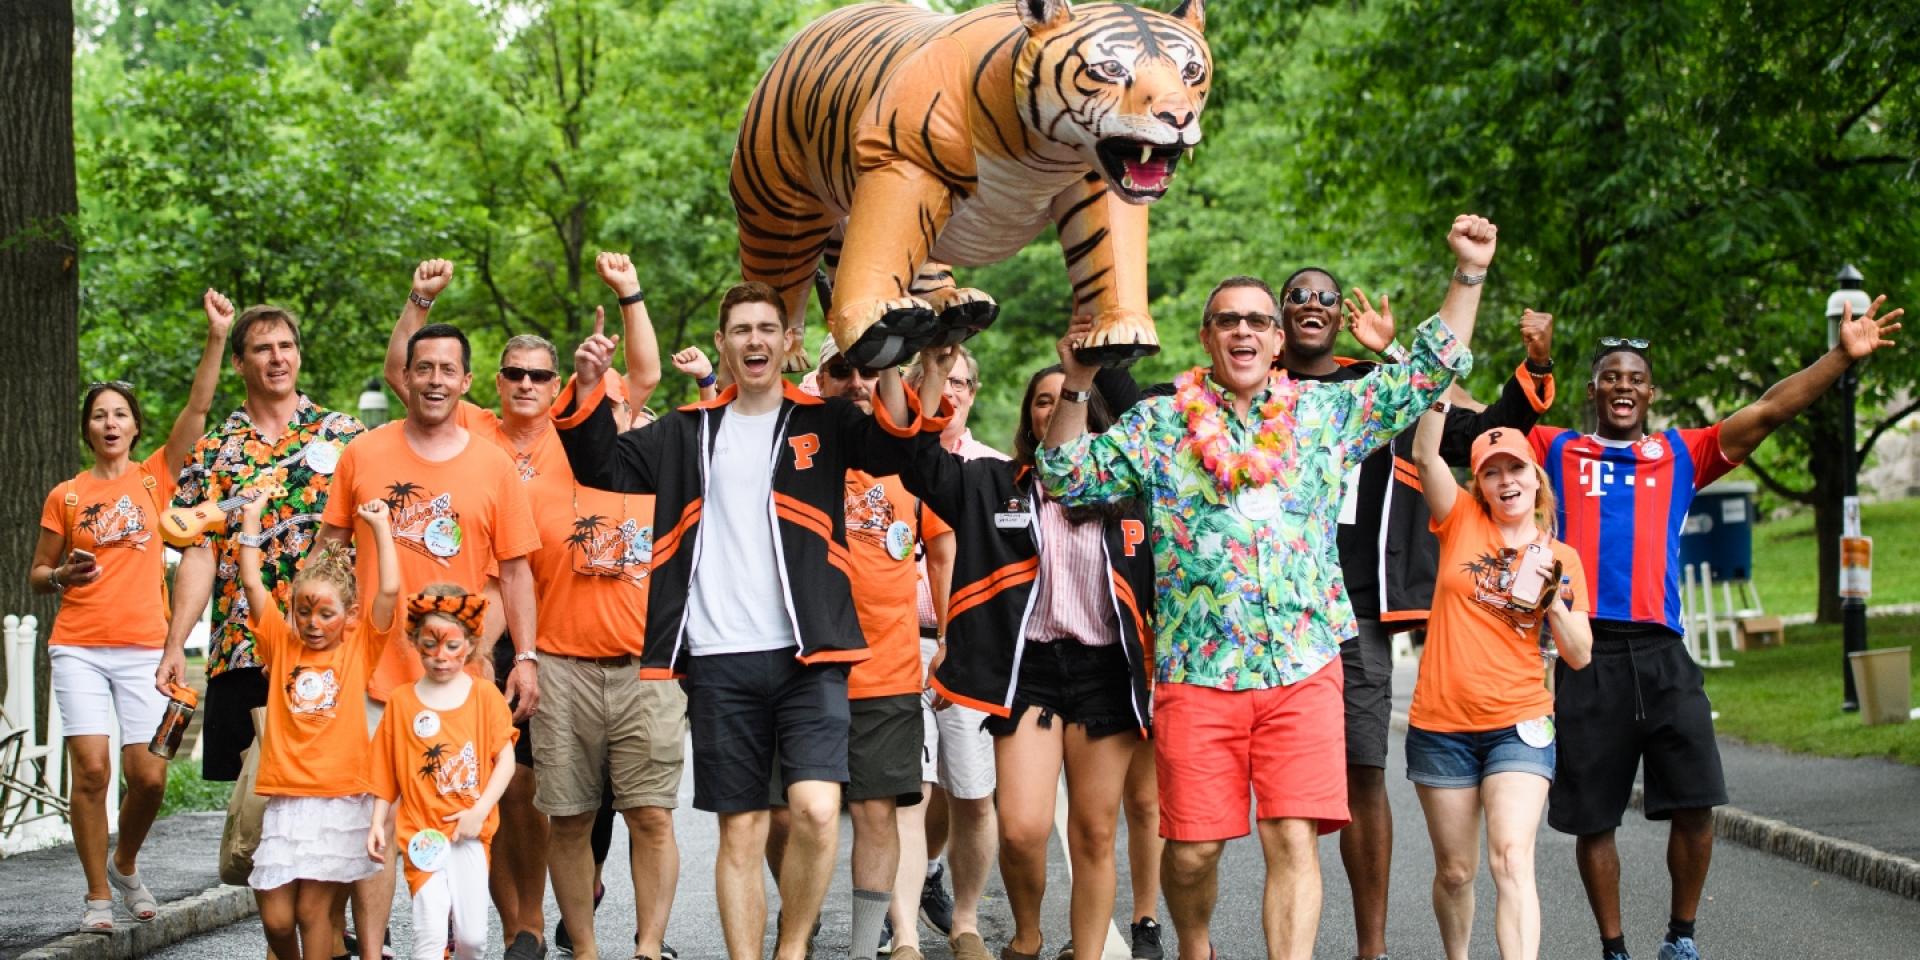 Group photo of alumni and children on P-rade route.